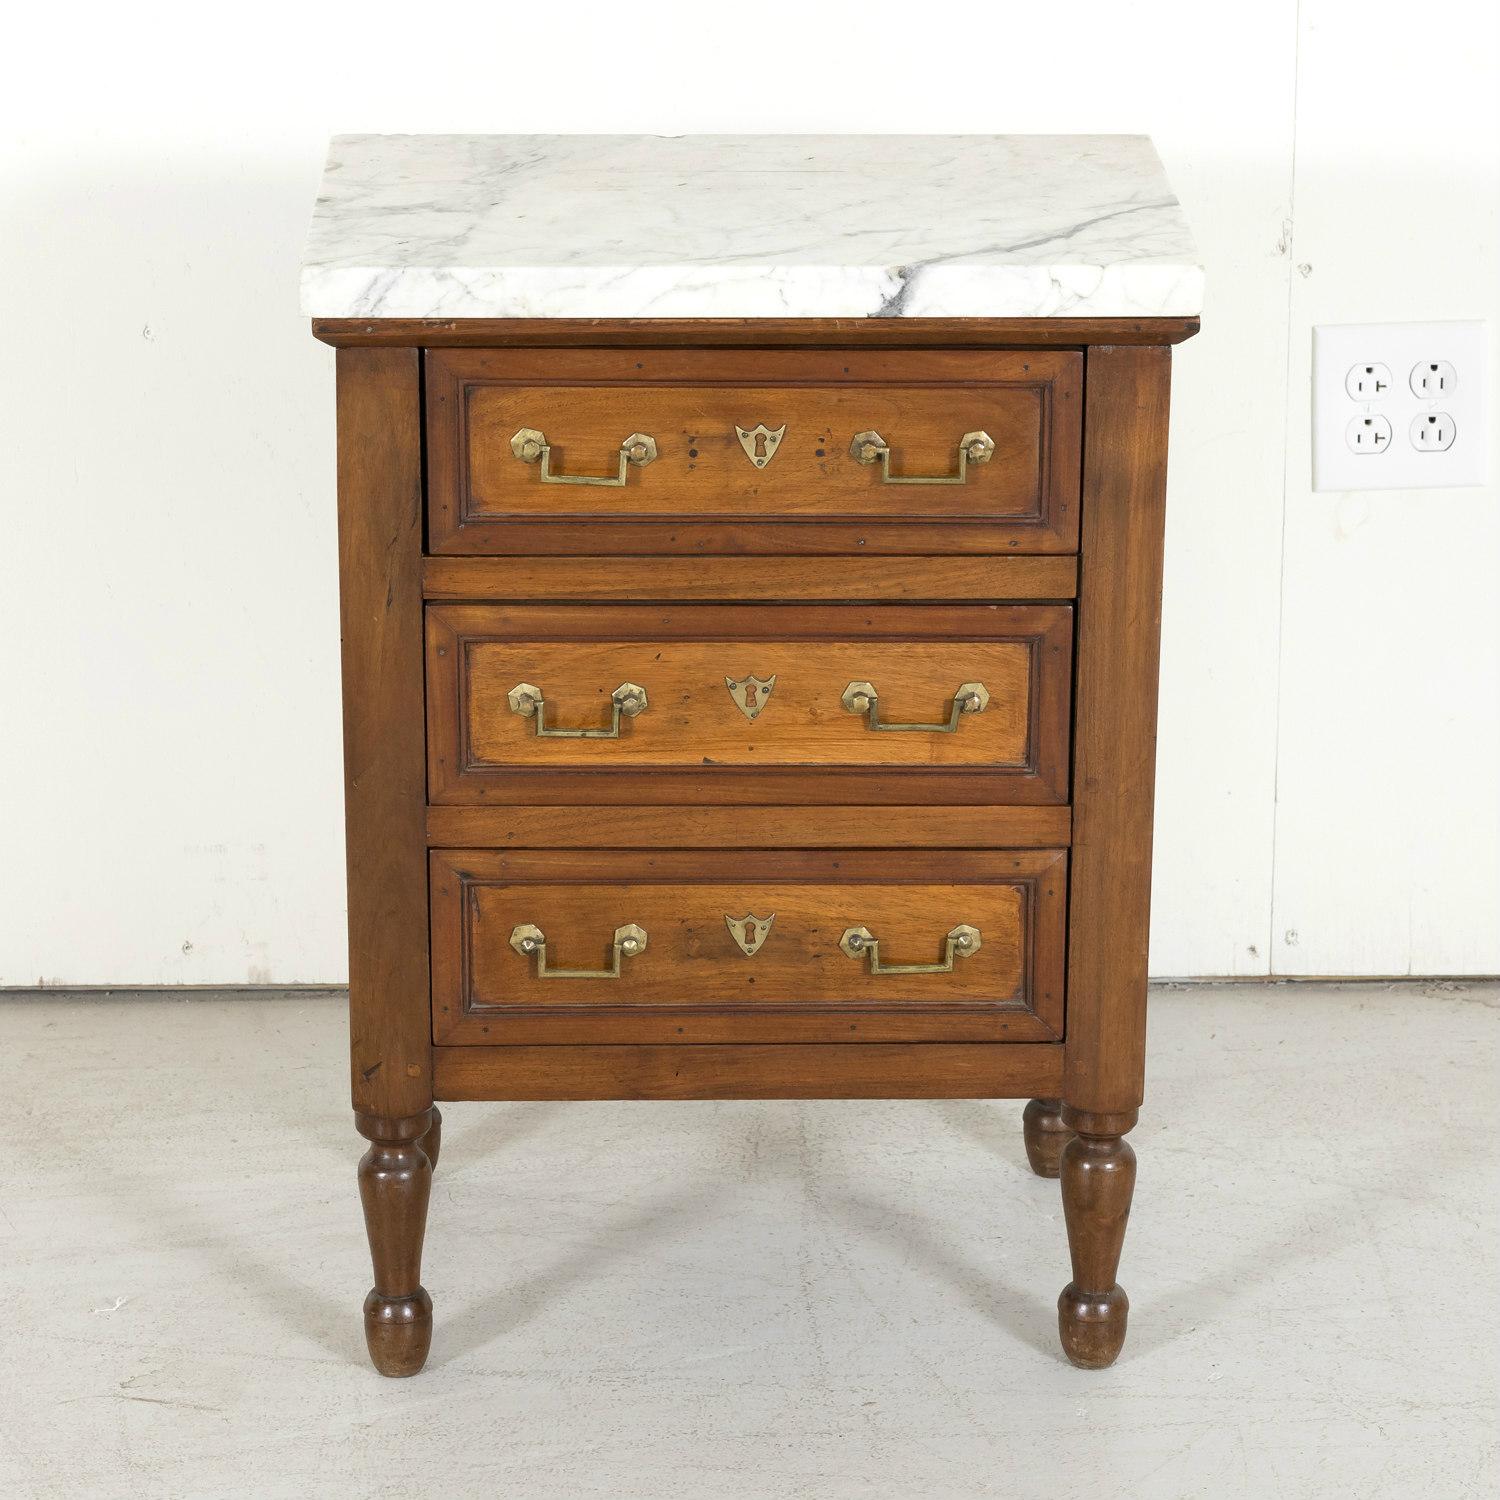 A 19th century French Louis XVI style petite commode handcrafted of walnut near Villeneuve les Avignon in the South of France, circa 1850s. Having a thick rectangular Carrara marble top over three drawers with the original neoclassical drop bail